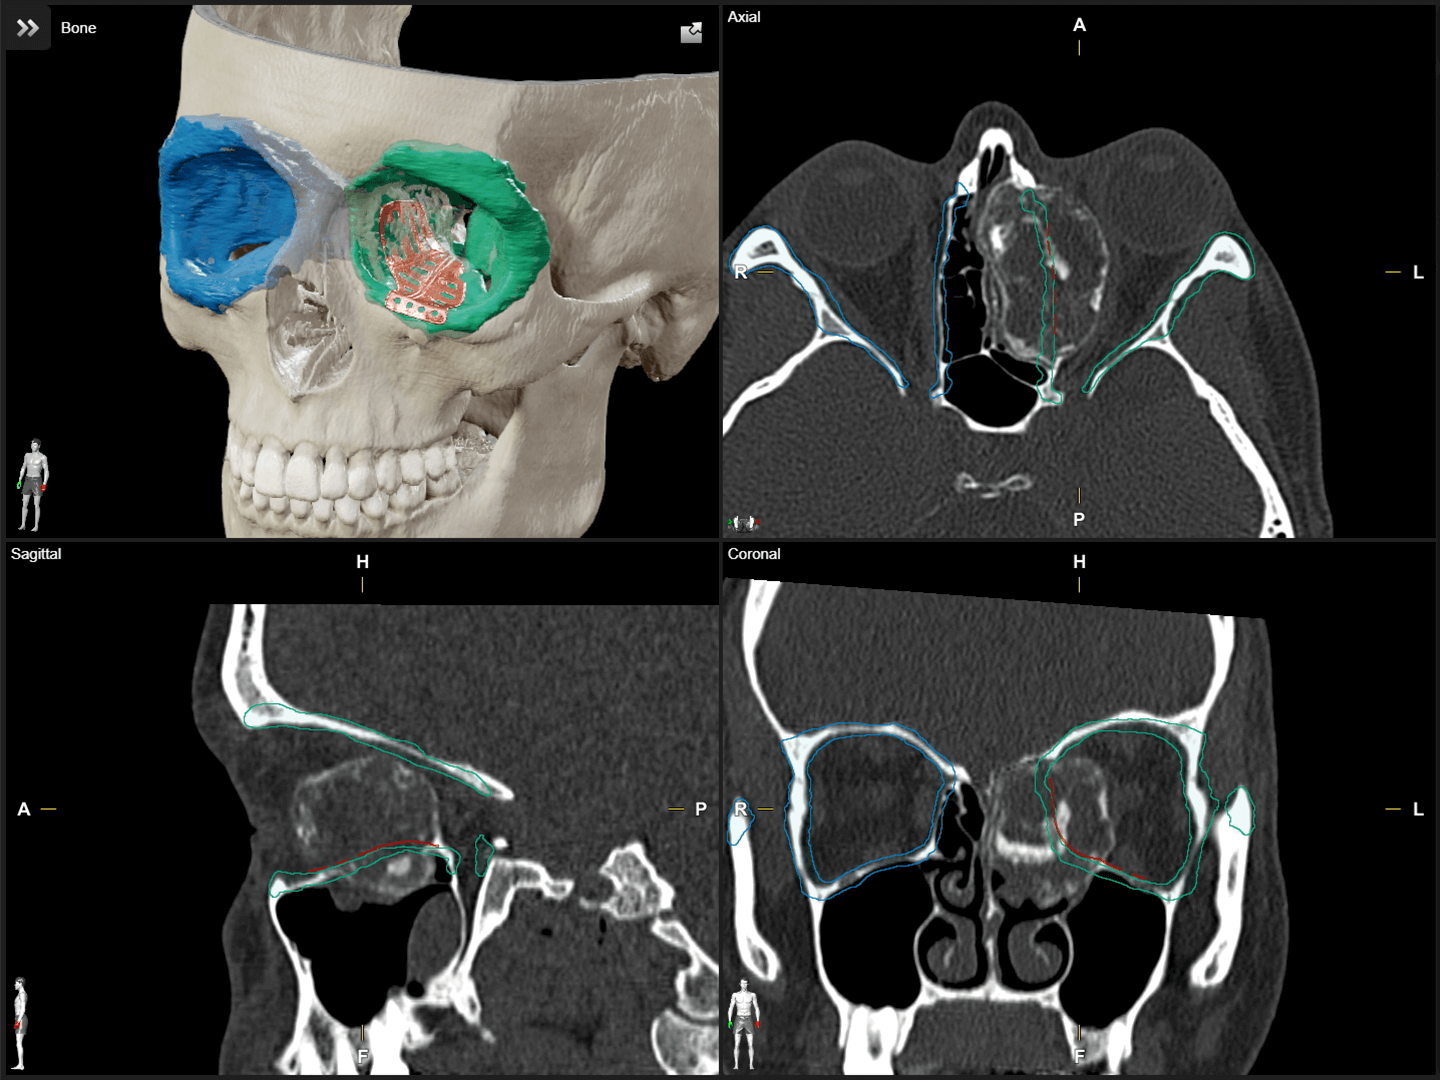 Four views of imaging scans of a skull with segmented objects used for craniomaxillofacial surgery planning